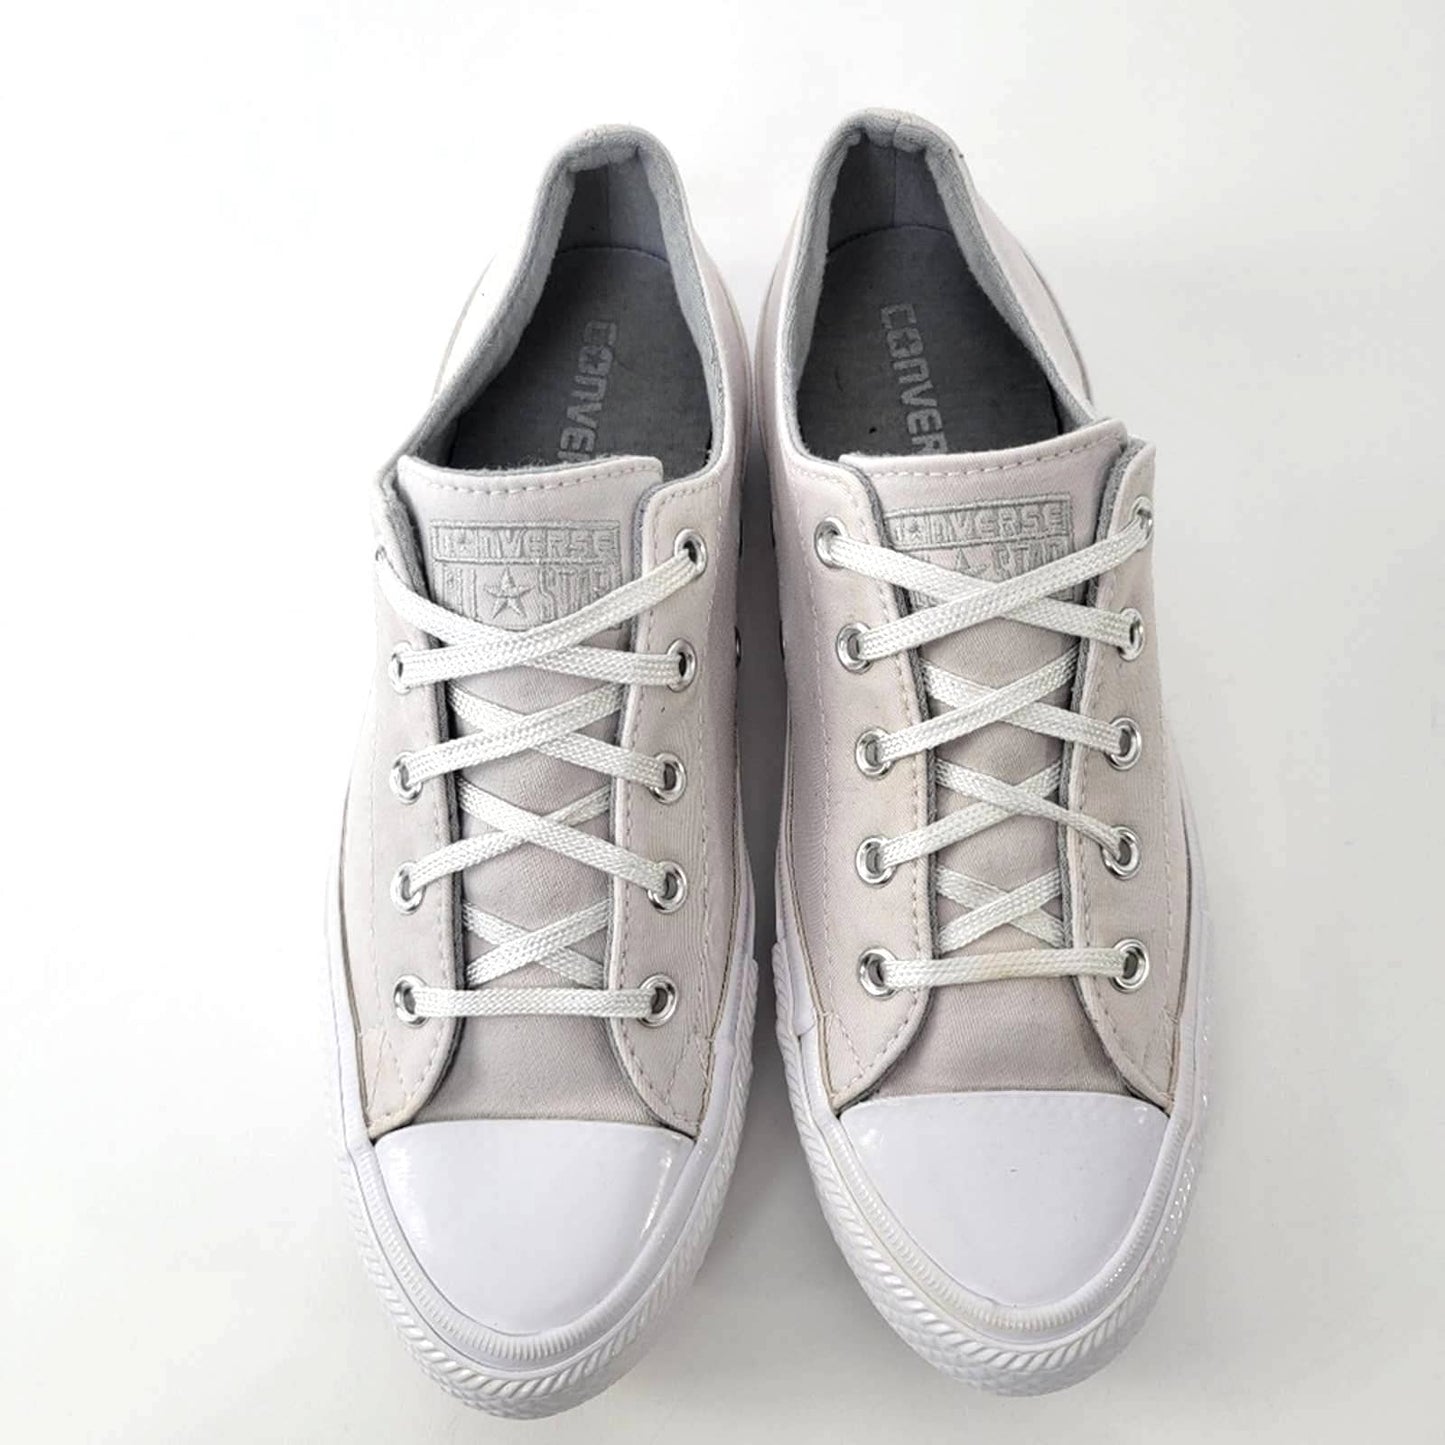 Converse Chuck Taylor All Star Gemma Low White Sneakers - 7.5